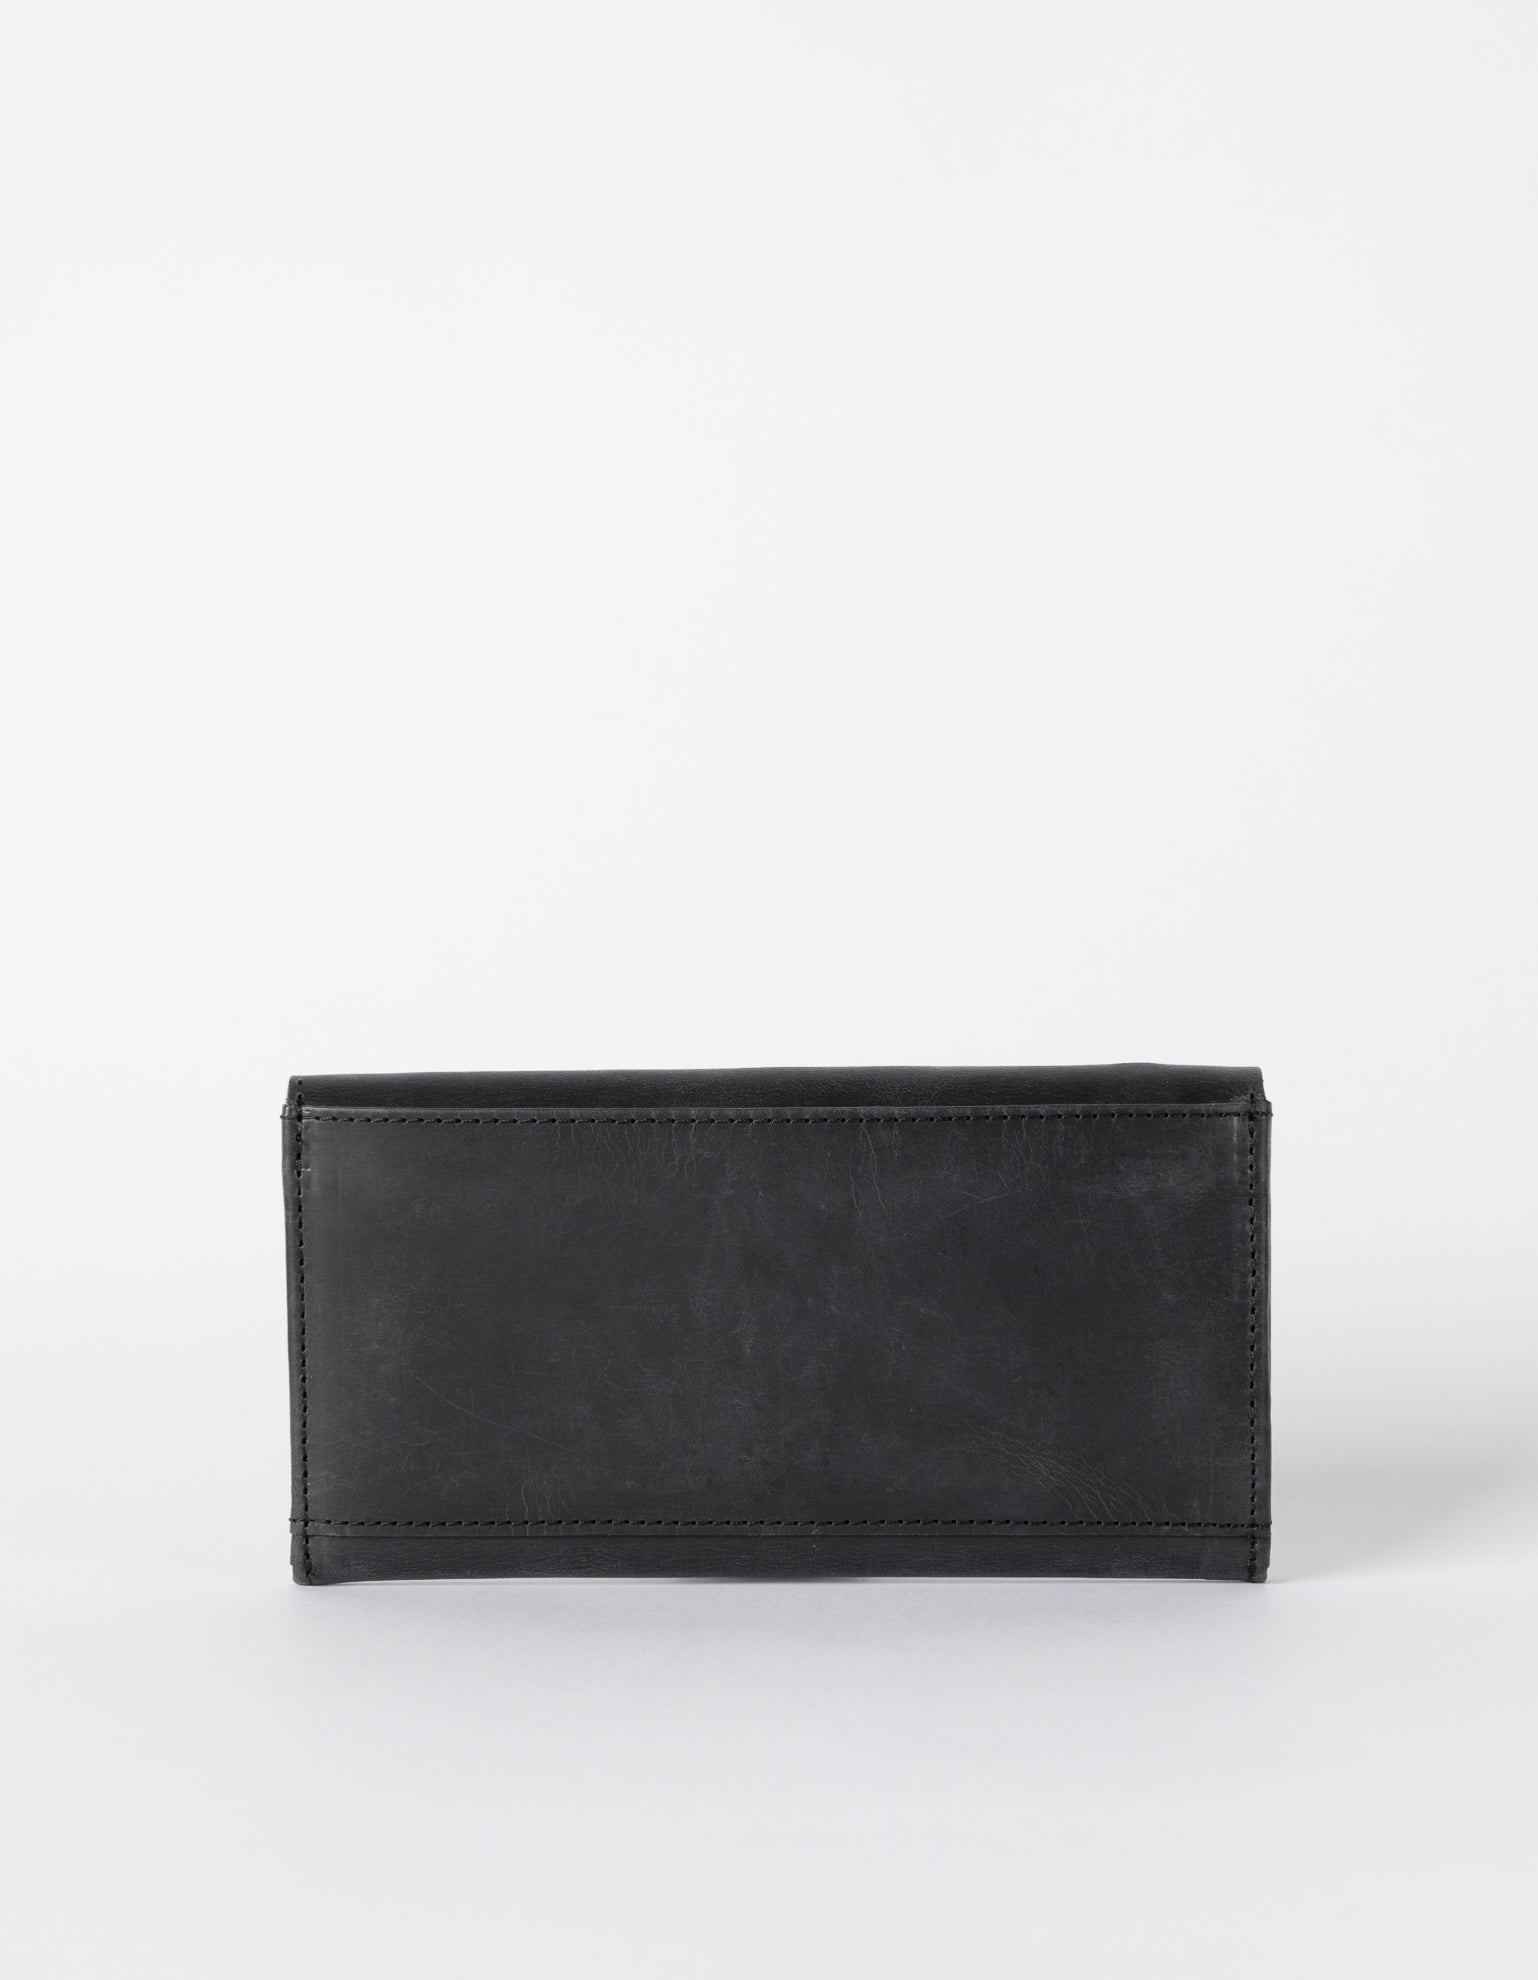 Pixie Pouch Black Hunter Leather. Rectangular shaped fold over wallet. Back product image.